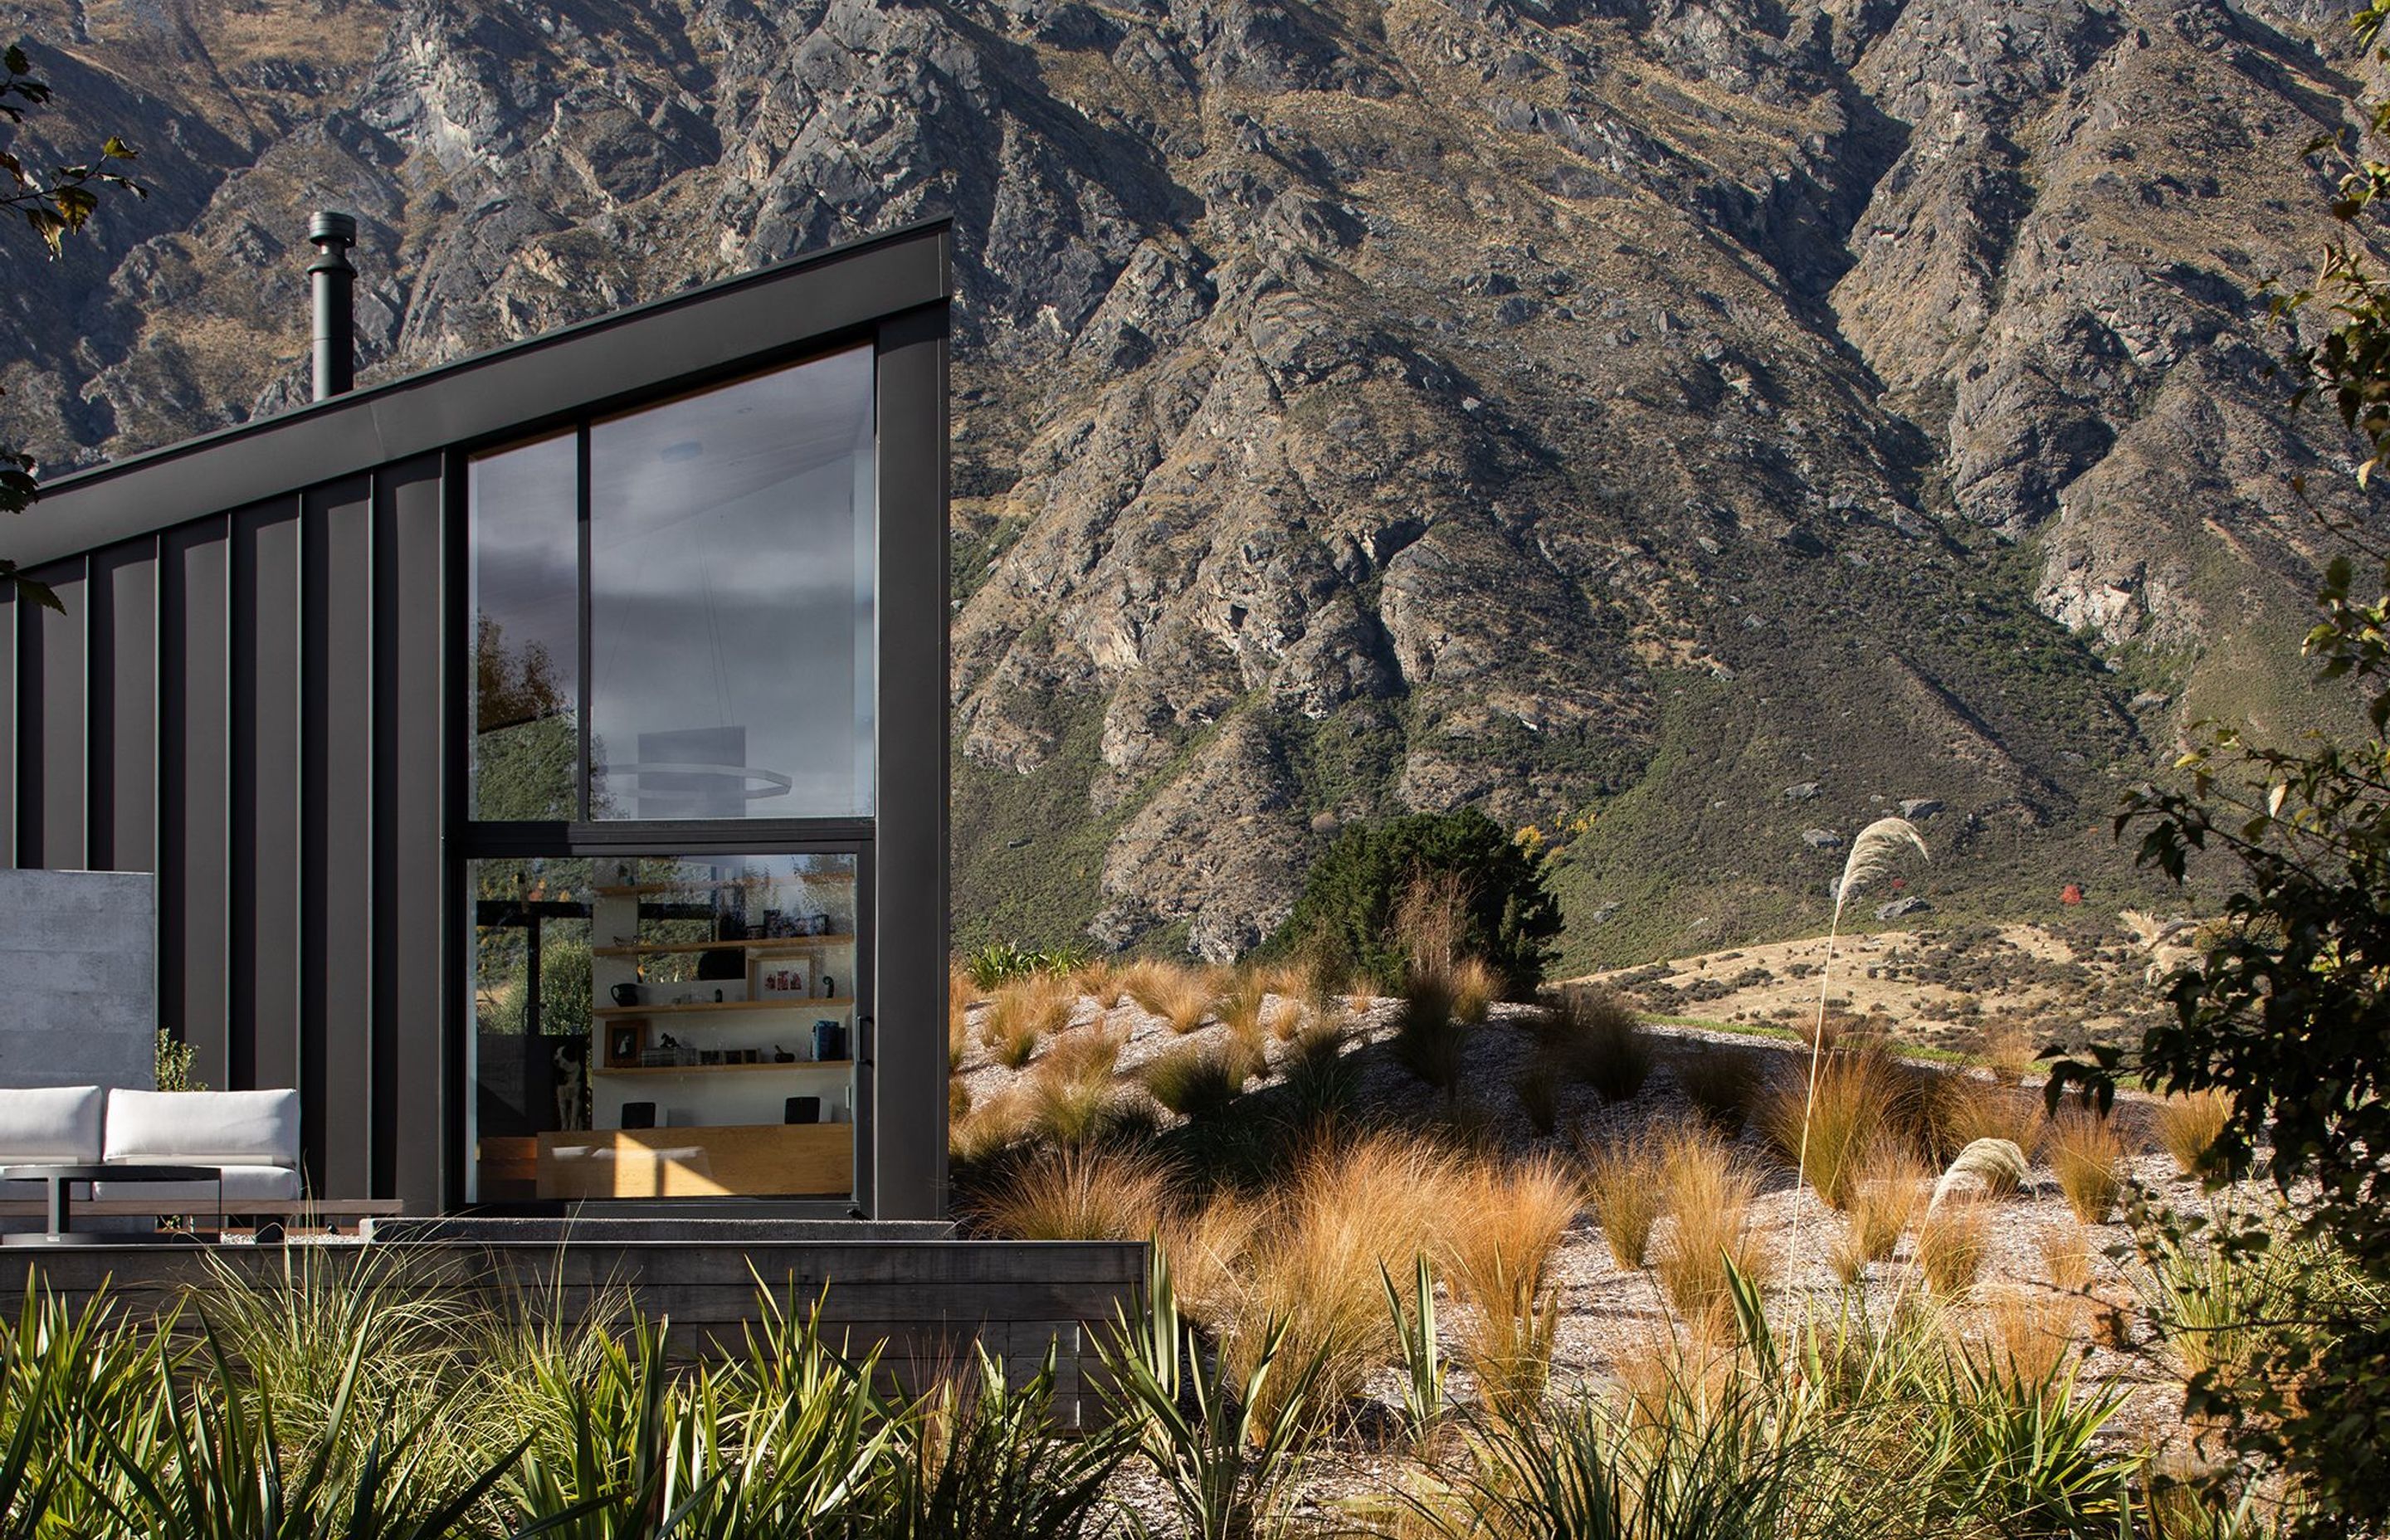 The asymmetrical form and recessive metal cladding is designed to match the schist of the surrounding rocky landscape.